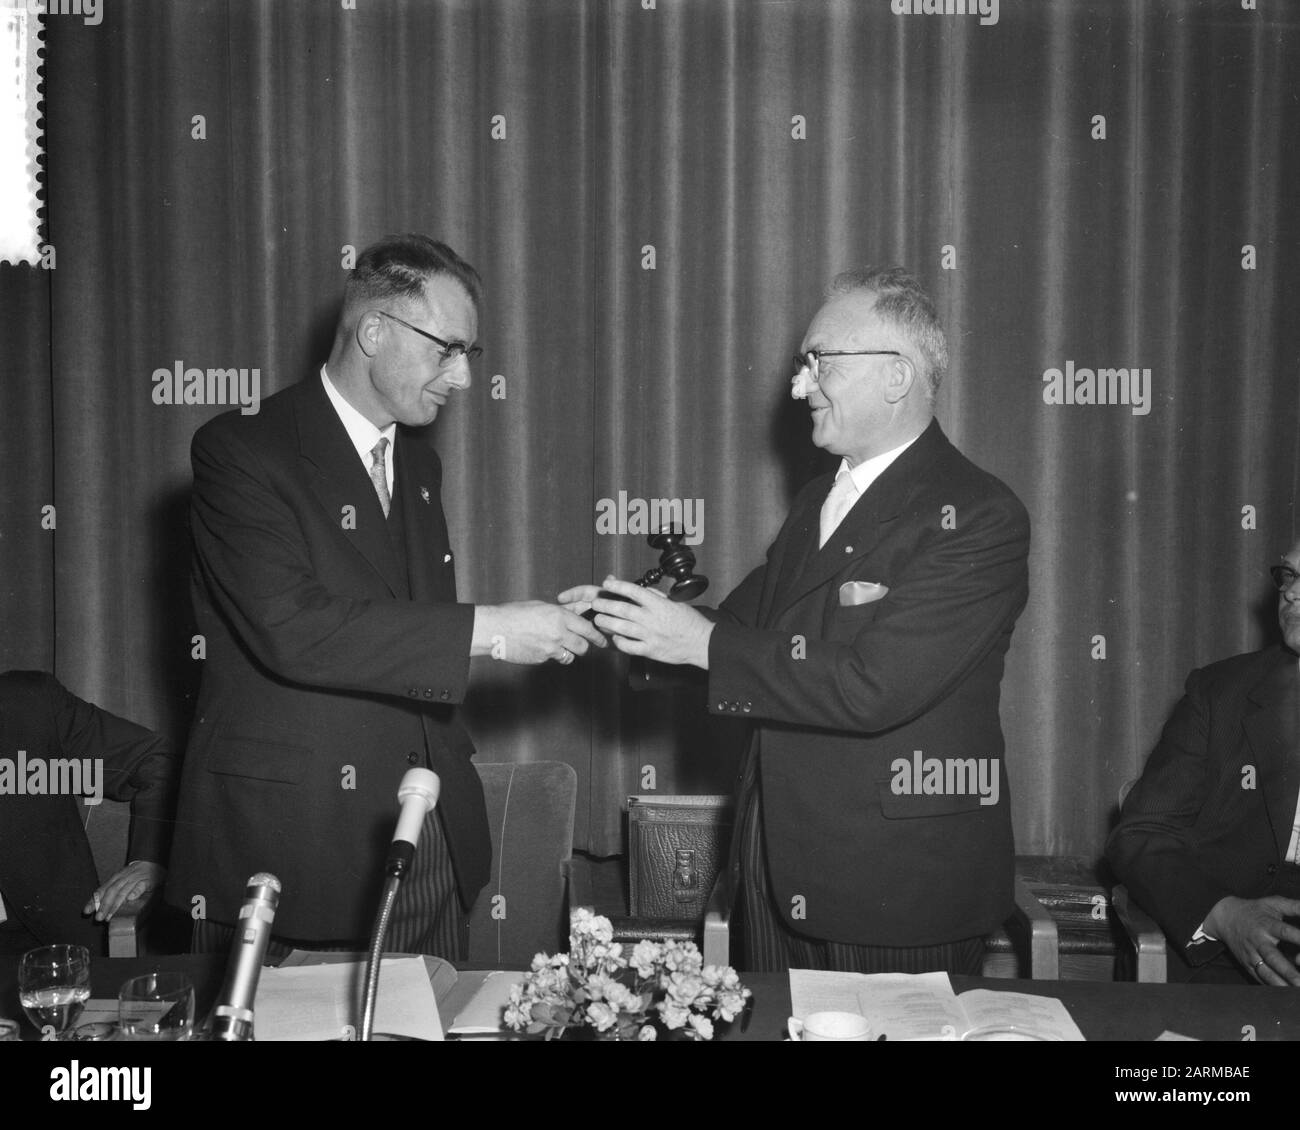 Election in the General Assembly of the CNV in Utrecht of a new chairman, left Mr. M. Ruppert, right C. J. van Mastrigt Date: 21 September 1959 Location: Utrecht Keywords: Elections, Members' Meetings, Chairmen Personal name: C. J. van Mastrigt, Ruppert, Marinus Institution Name: CNV Stock Photo